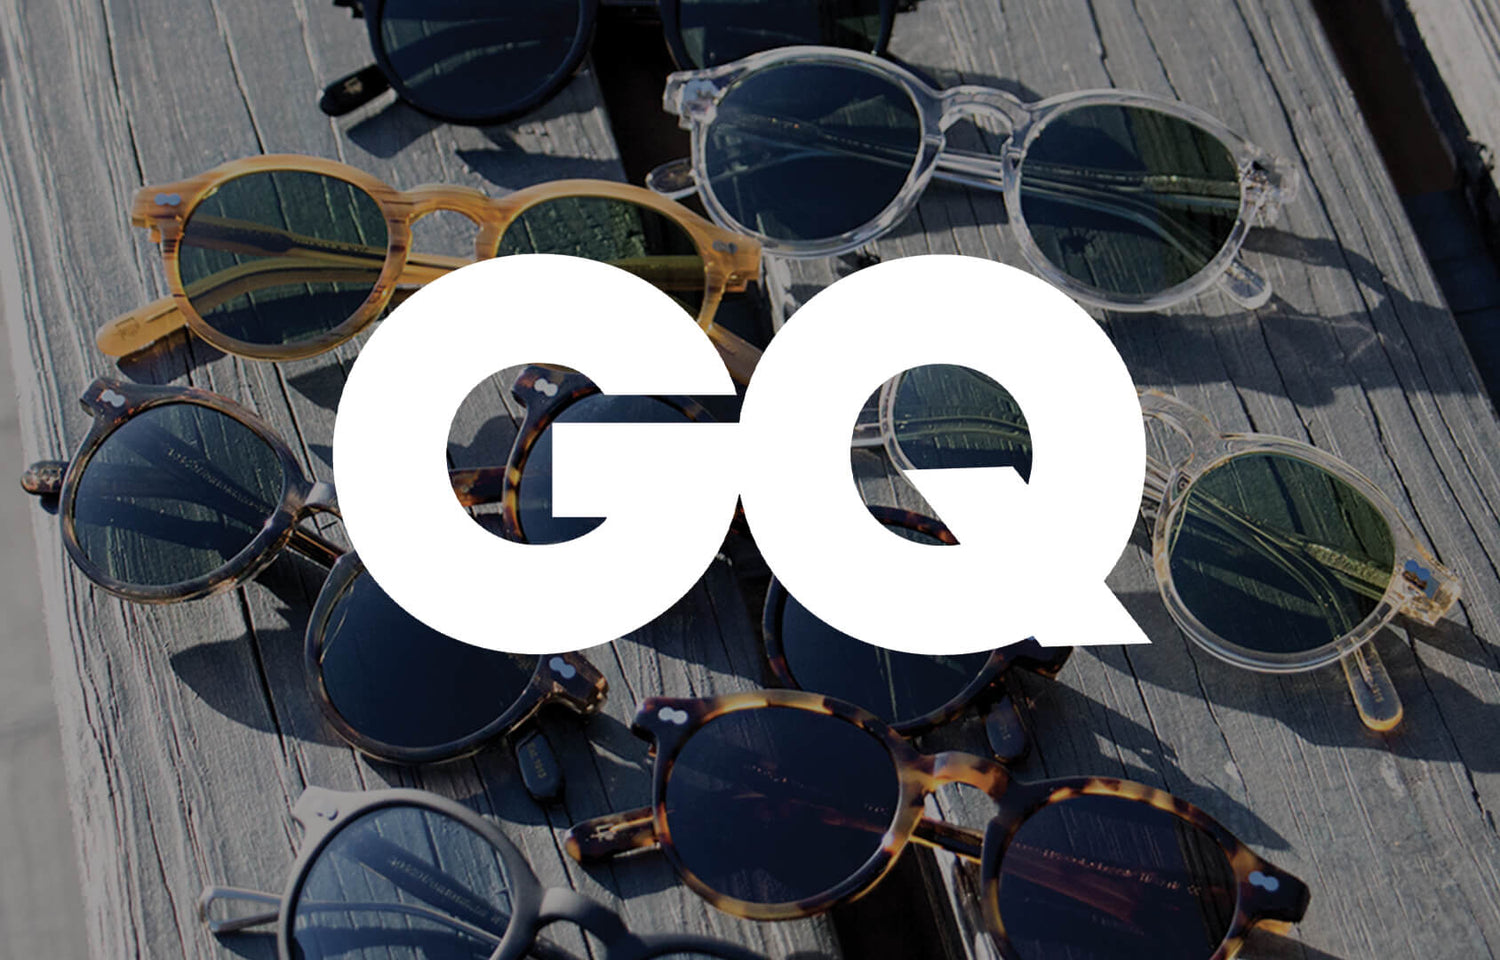 "These Round Sunglasses Have Serious Main Character Energy" Says GQ